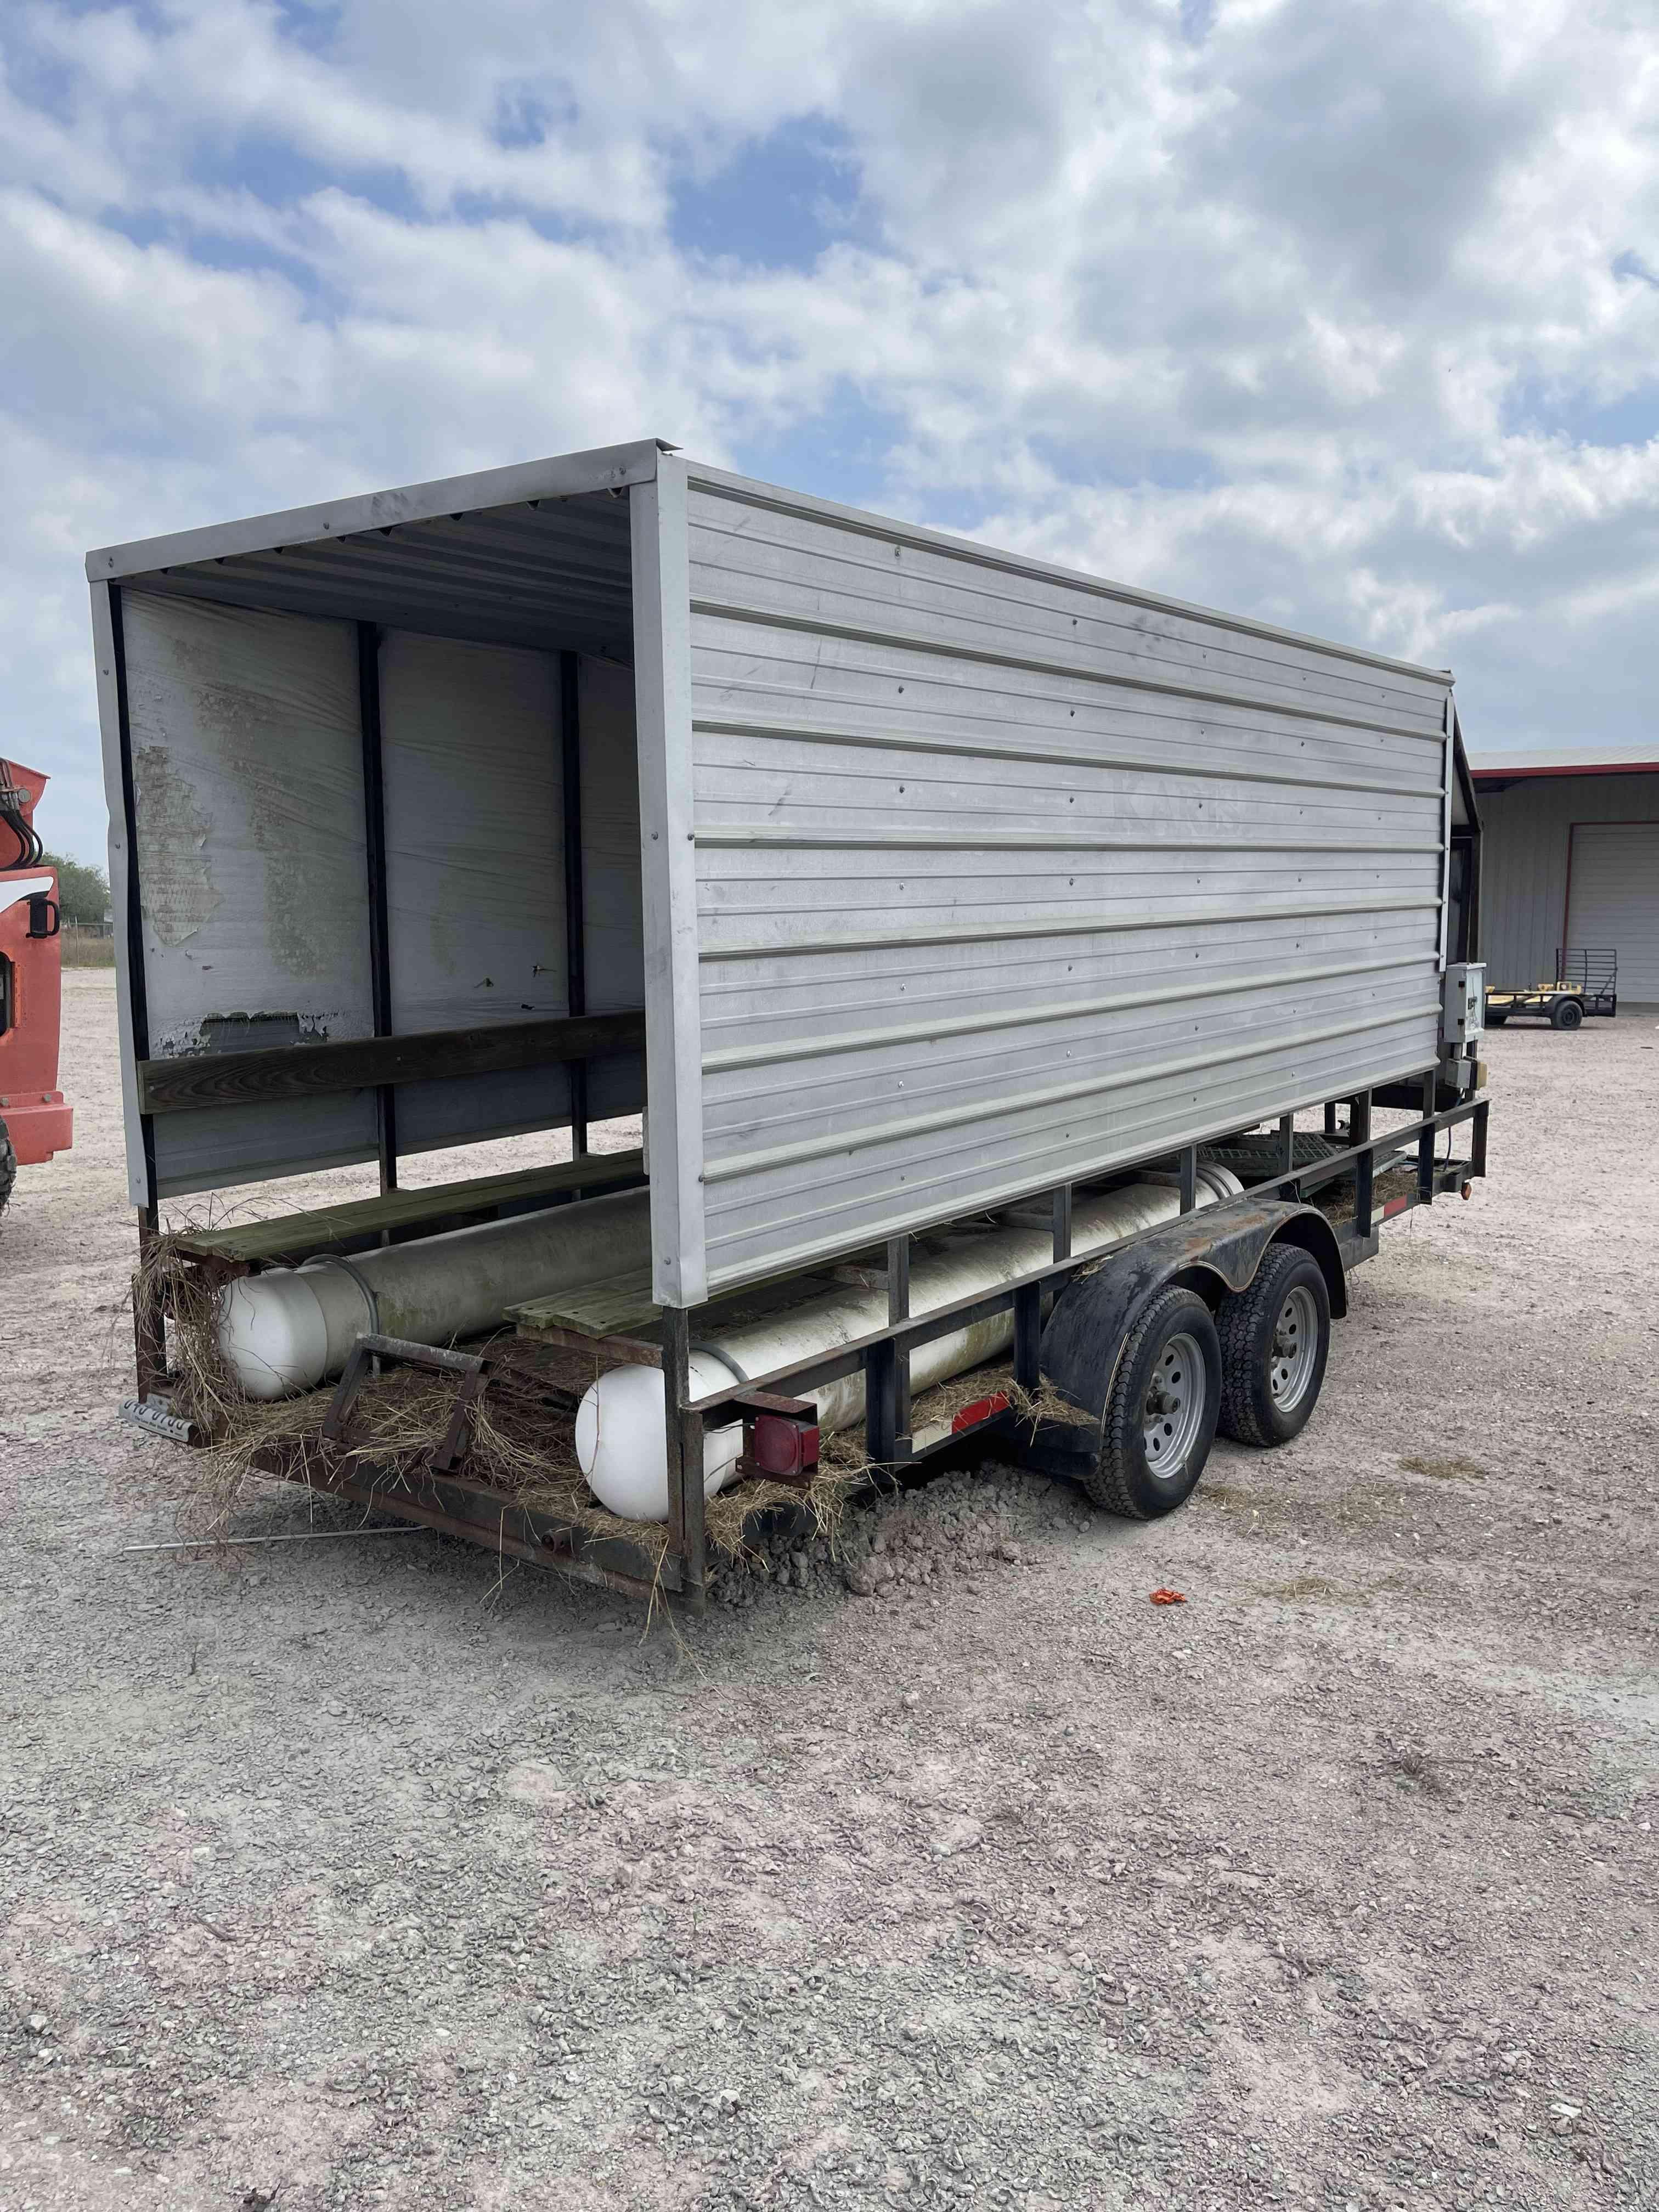 7'W x 20'L T/A Cooling Trailer, (2) Water Tanks, Steps, TX TAG 049875J (BILL OF SALE ONLY)